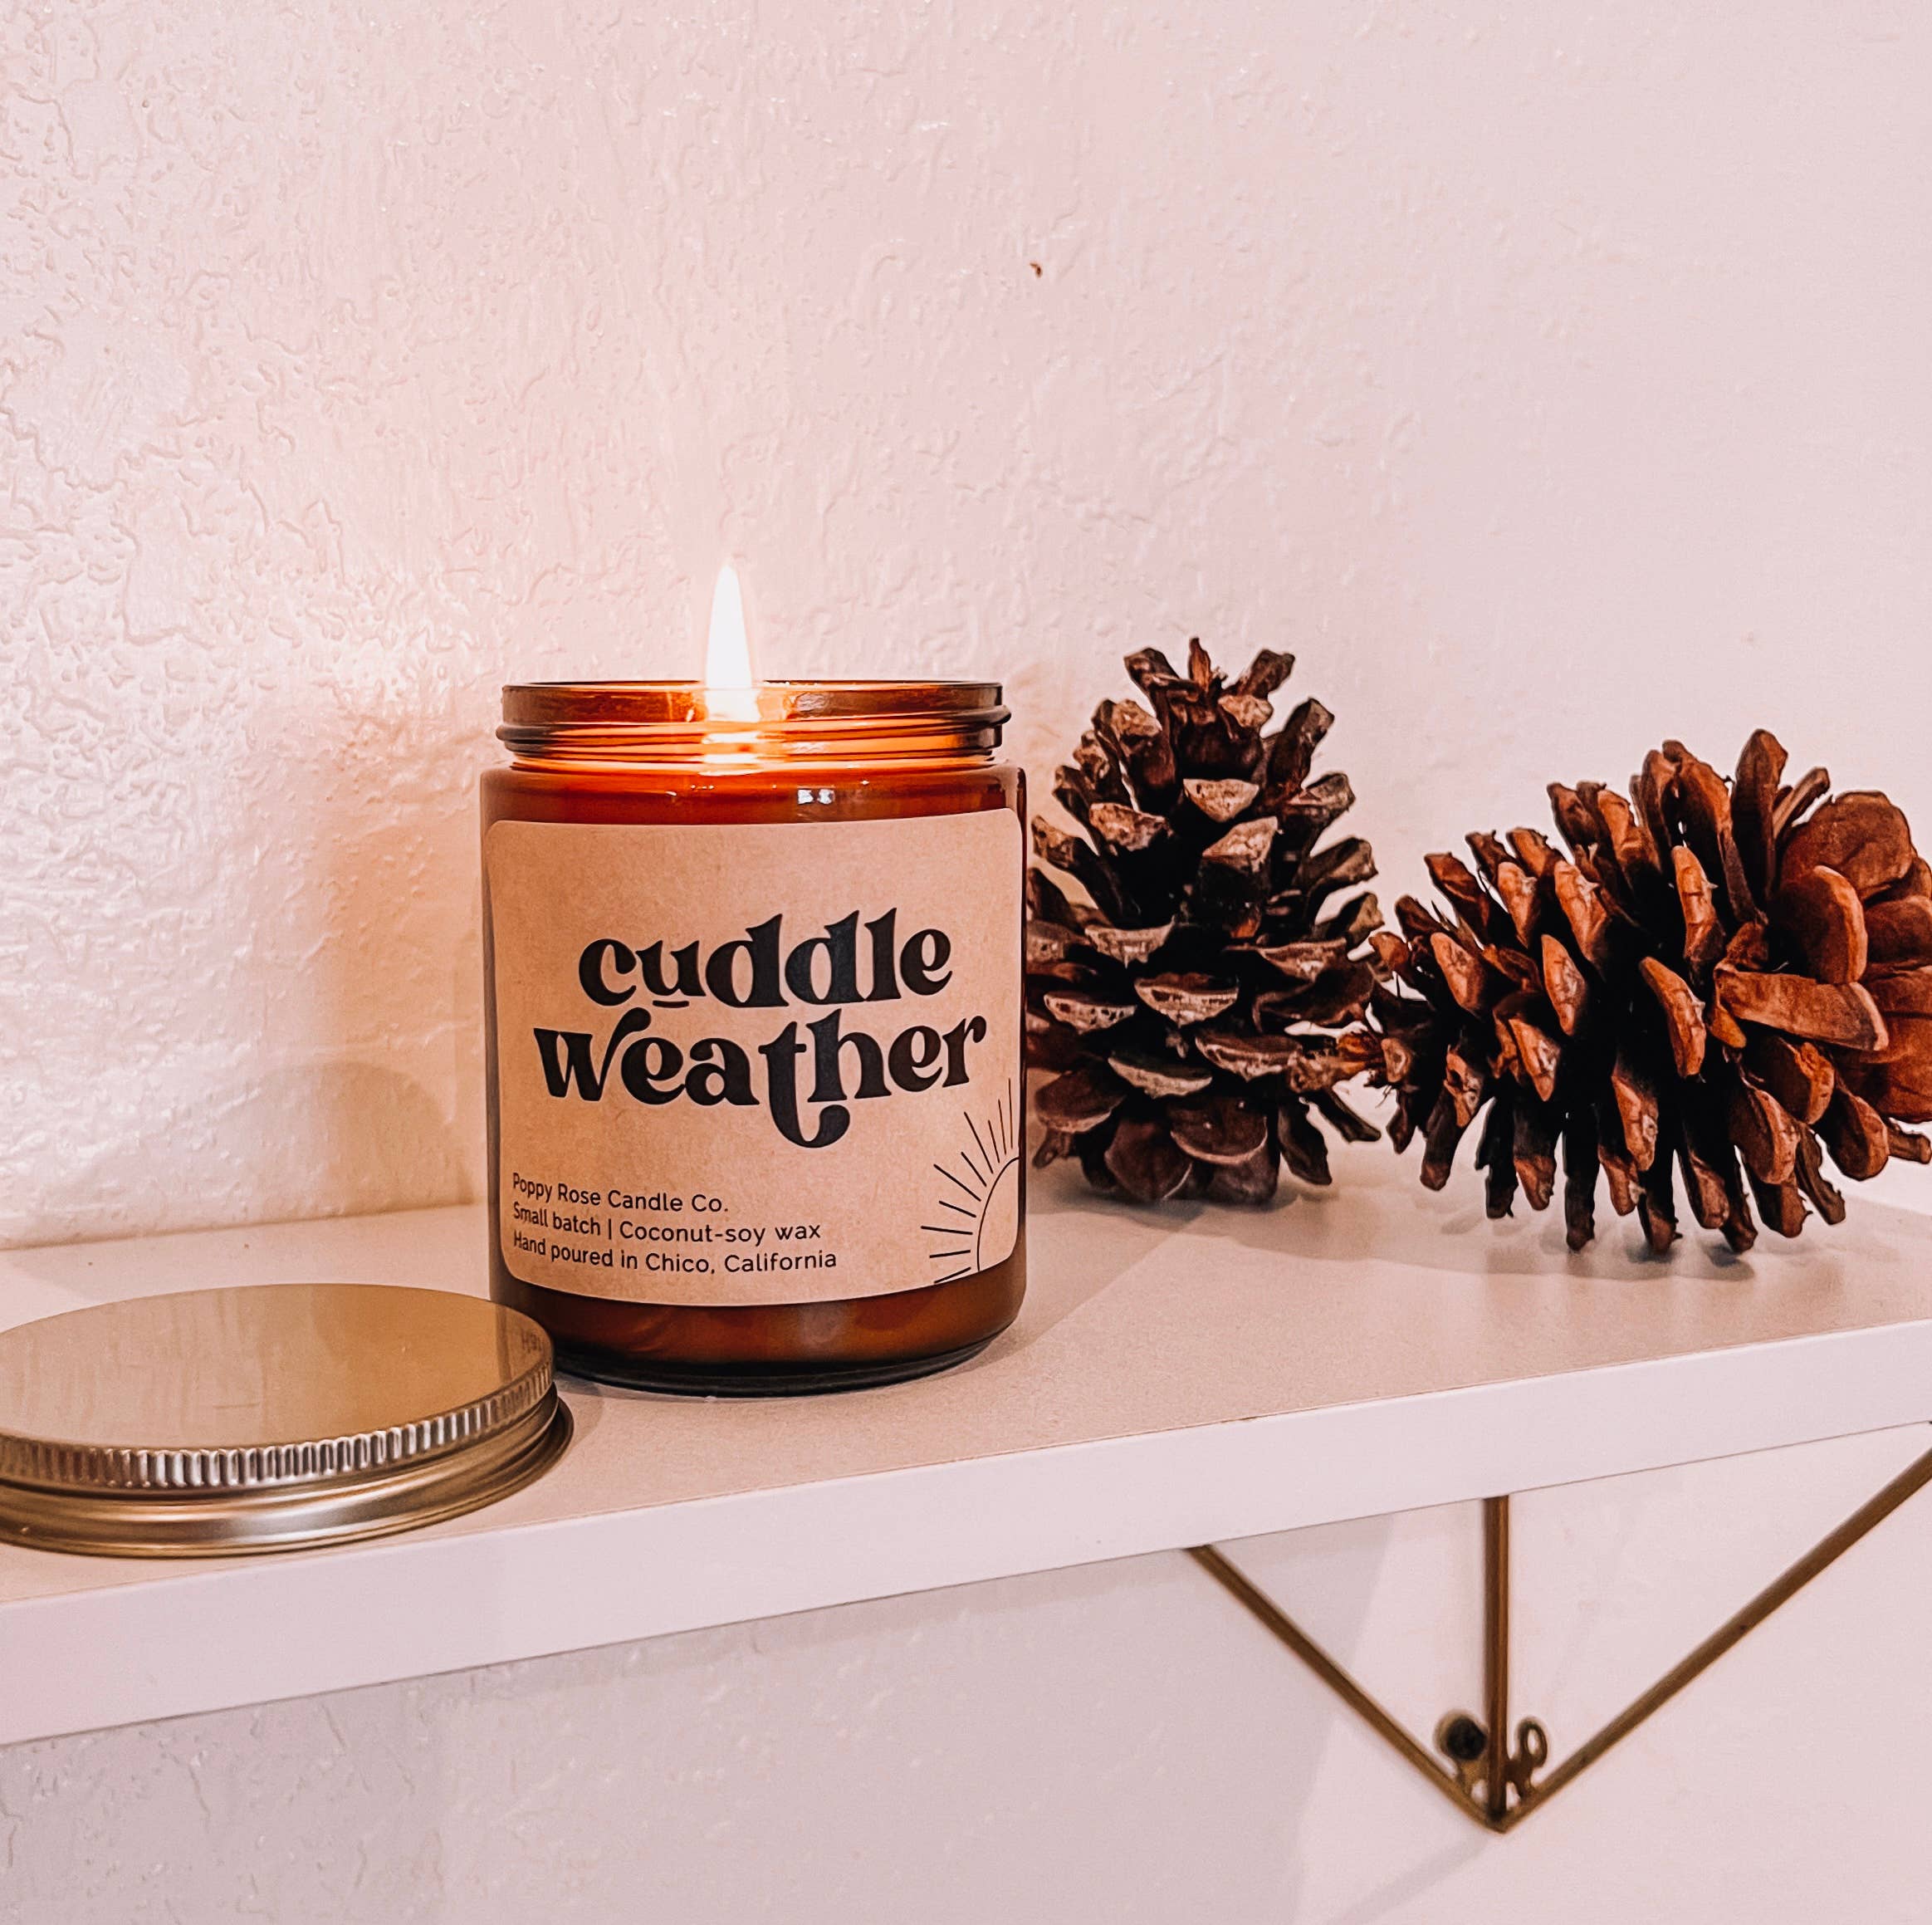 Poppy Rose Candle Co. - Cuddle Weather (seasonal) 8 oz coconut candle Fall candle